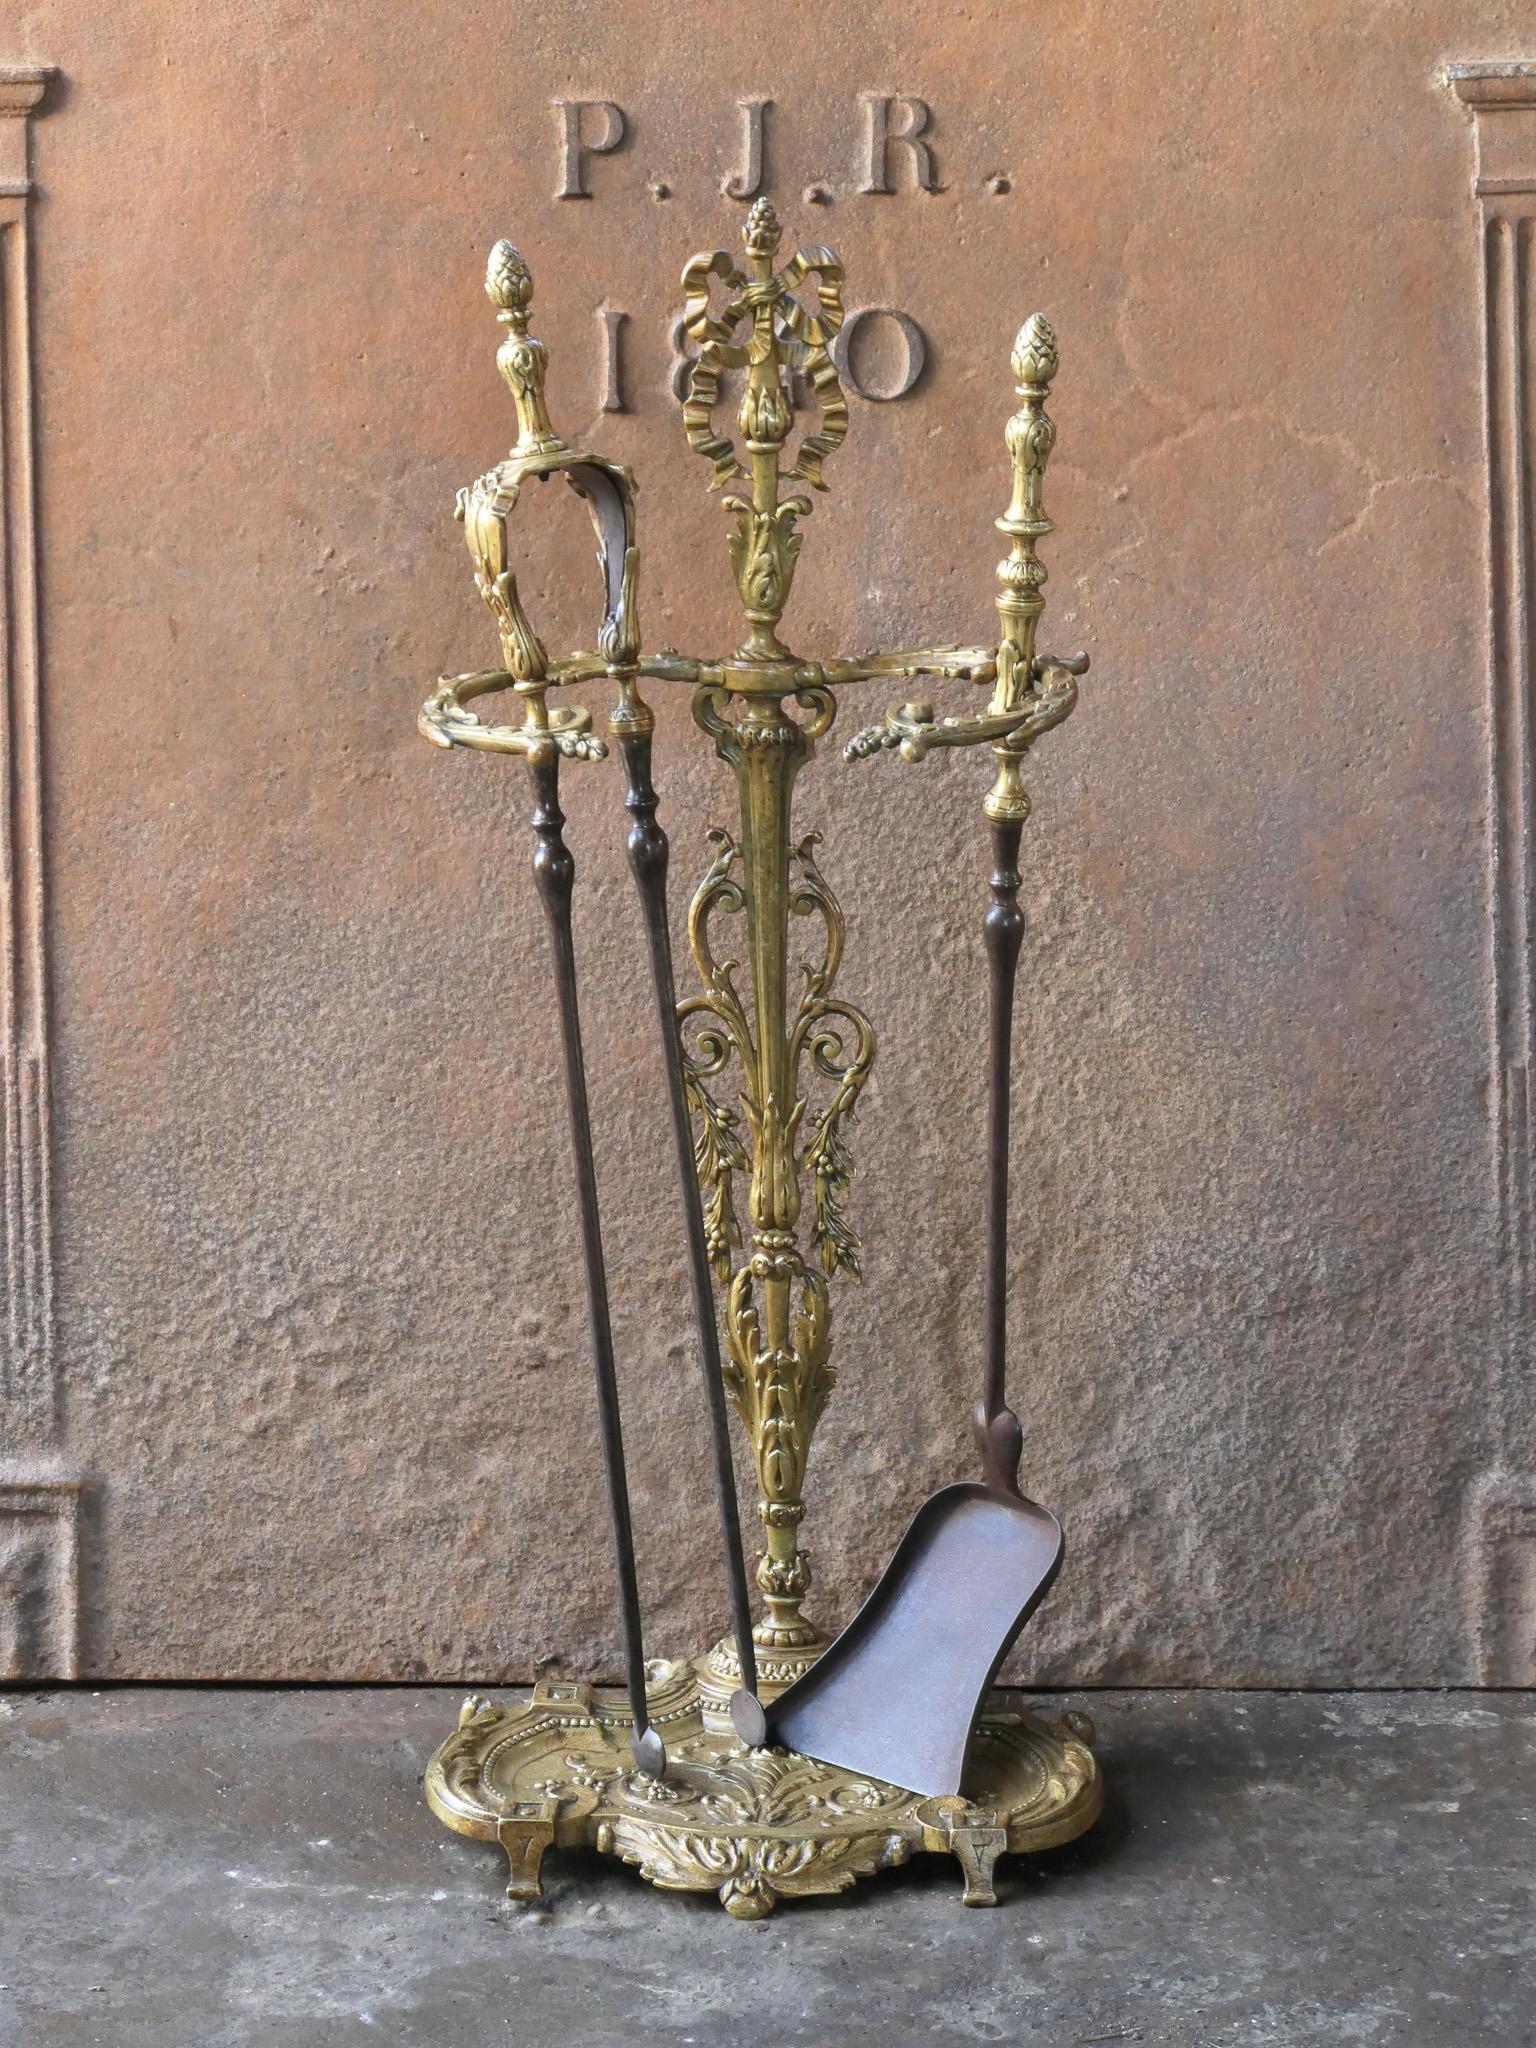 Richly decorated 18th - 19th century French Neoclassical fireplace tool set. The tool set consists of tongs, shovel and stand. The stand is made of brass and the tools of wrought iron with brass decoration. The set is in a good condition and fit for